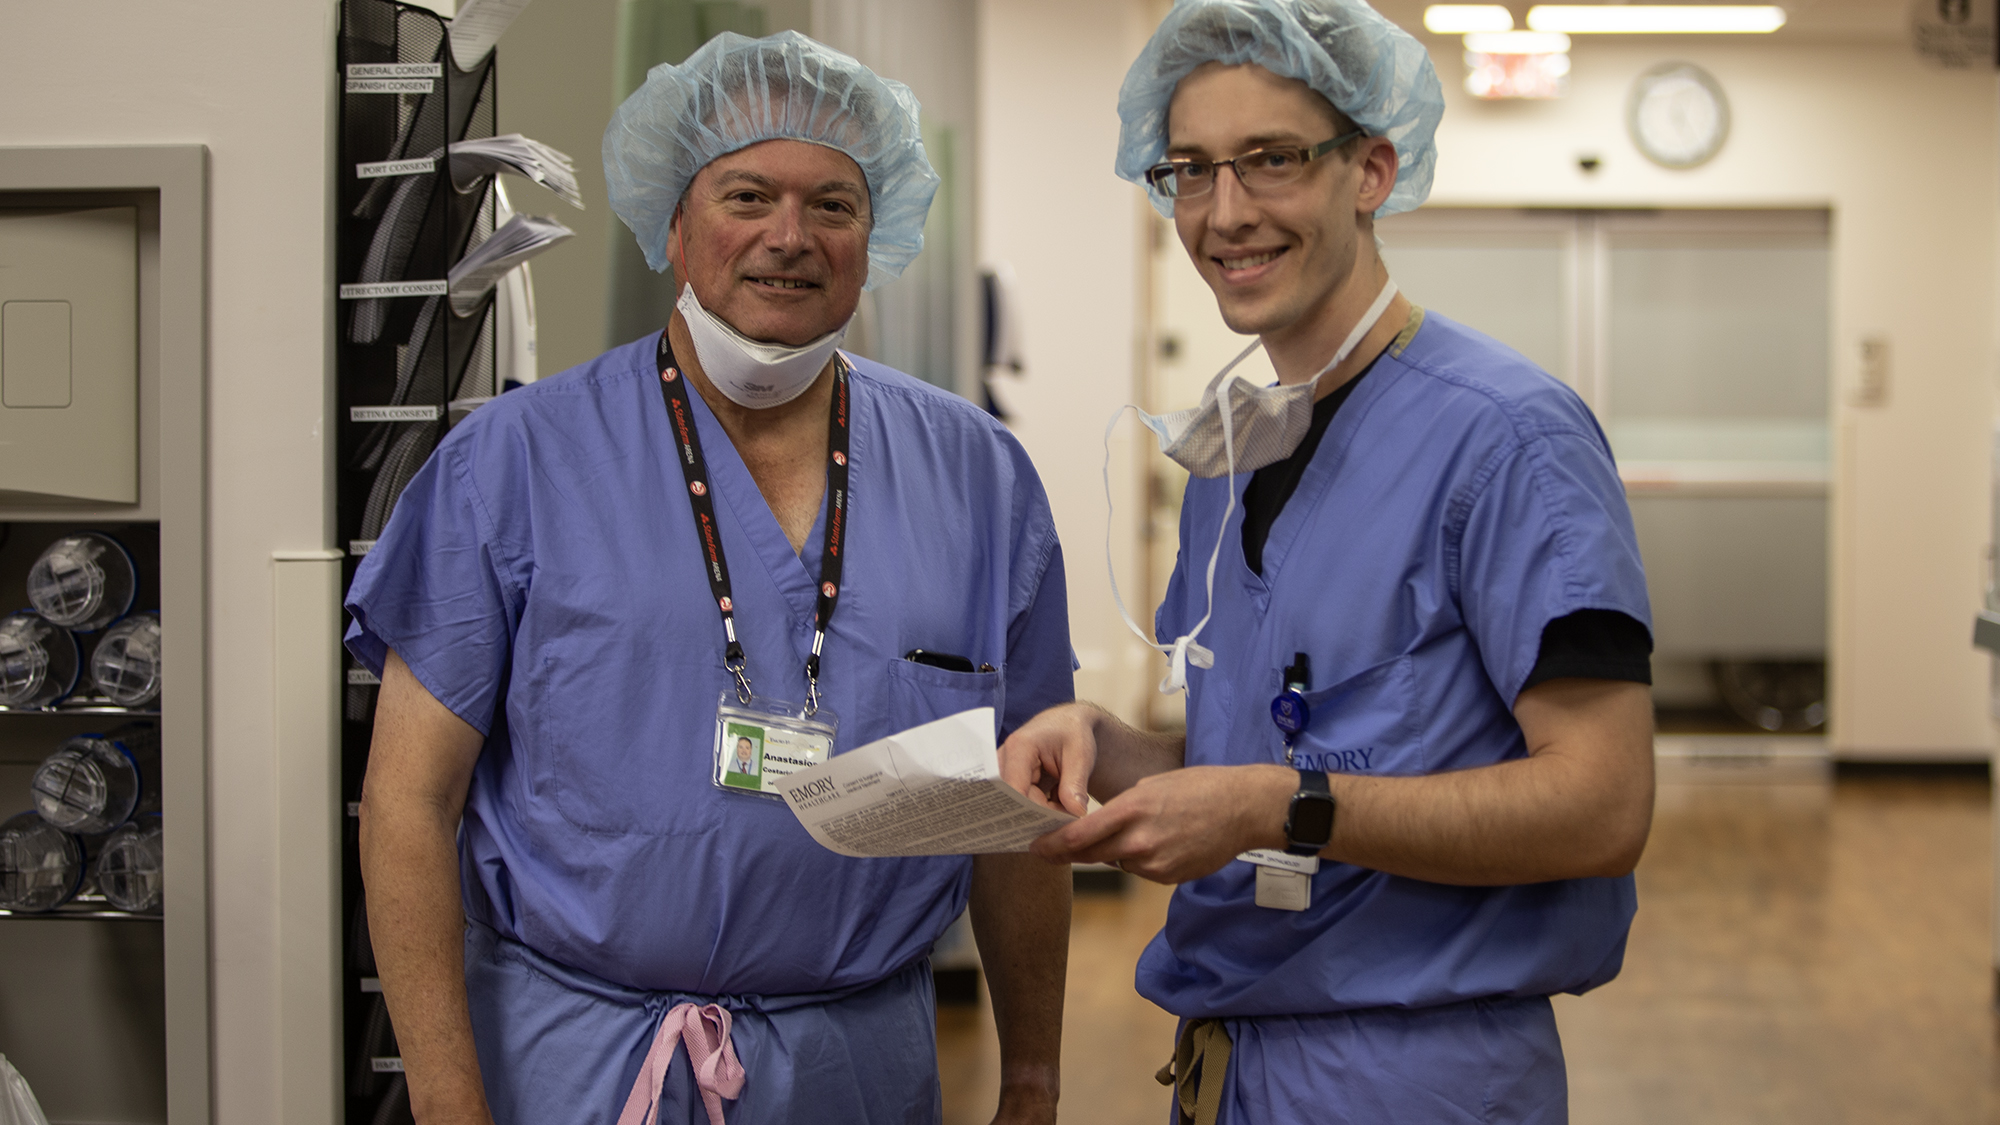 Dr. Anastasios Costarides and former Emory glaucoma fellow, Dr. Stephen Ambrose, in their surgical scrubs